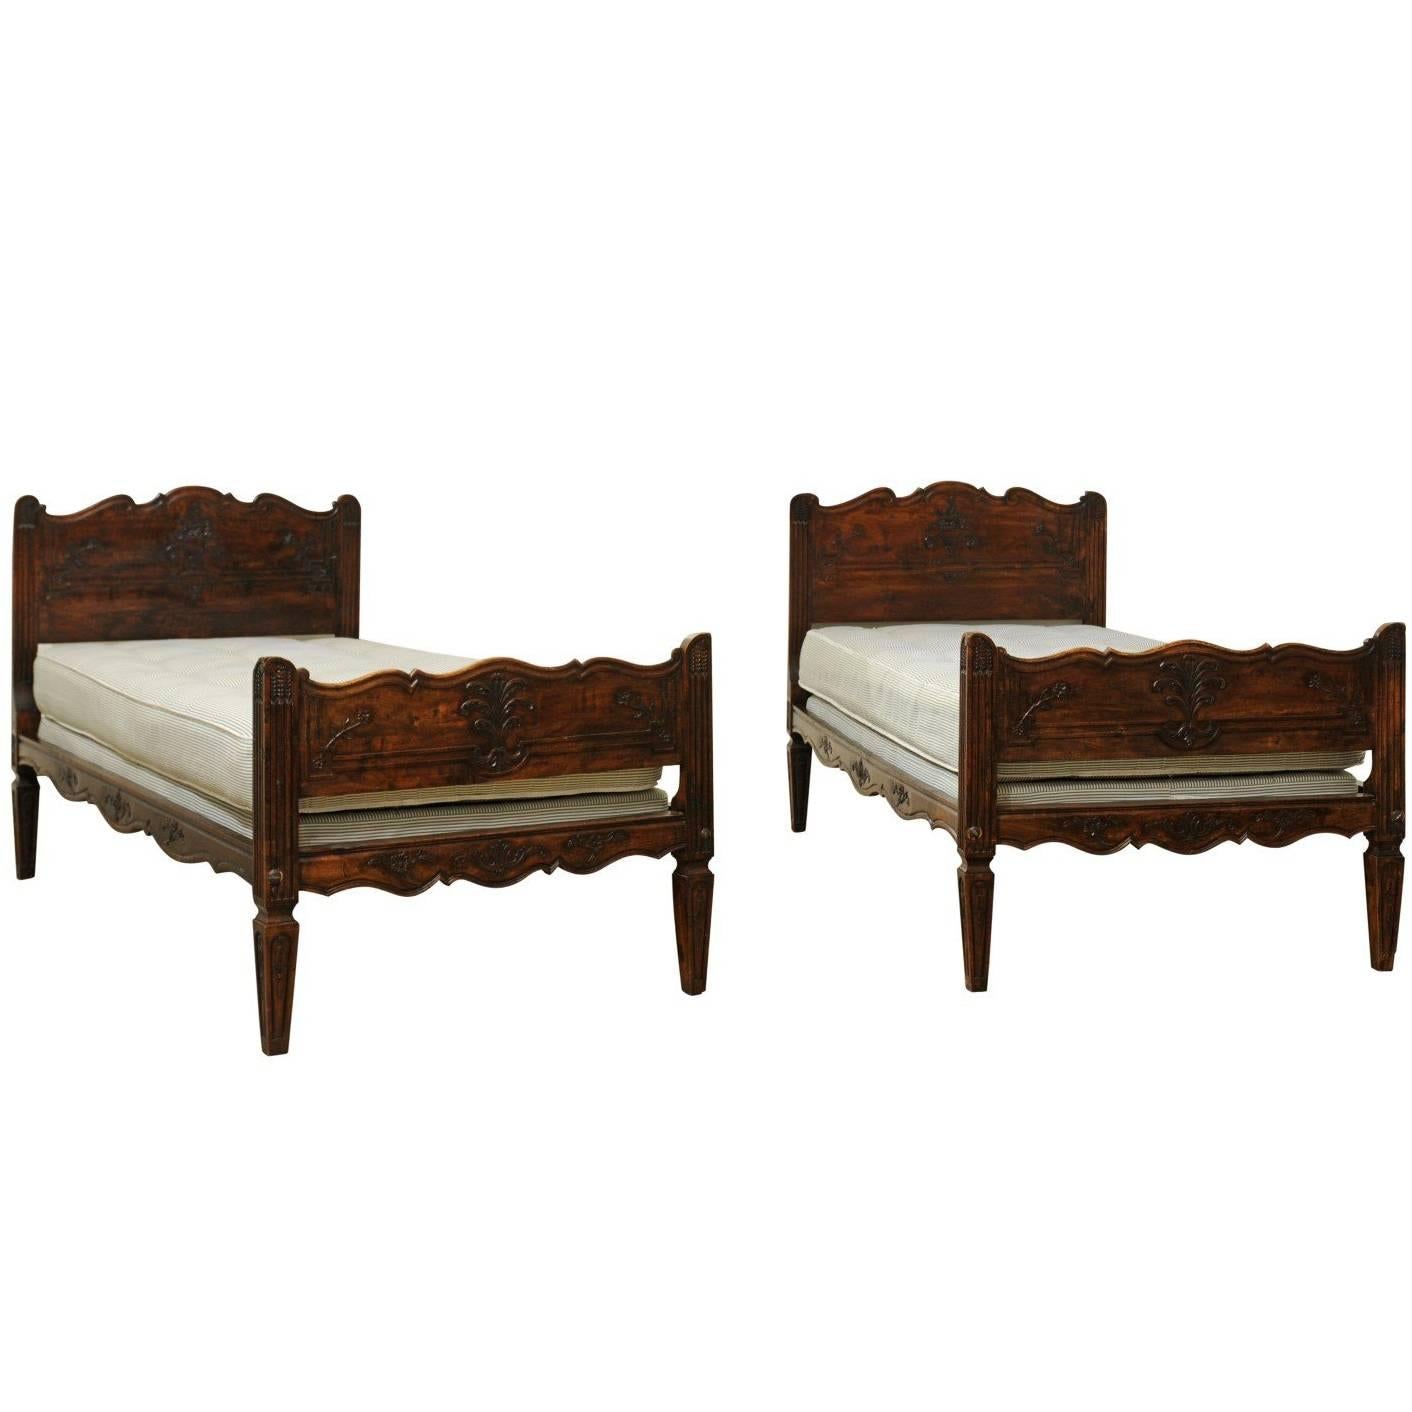 Pair of French 19th Century Walnut Twin Beds with Carved Headboard and Footboard